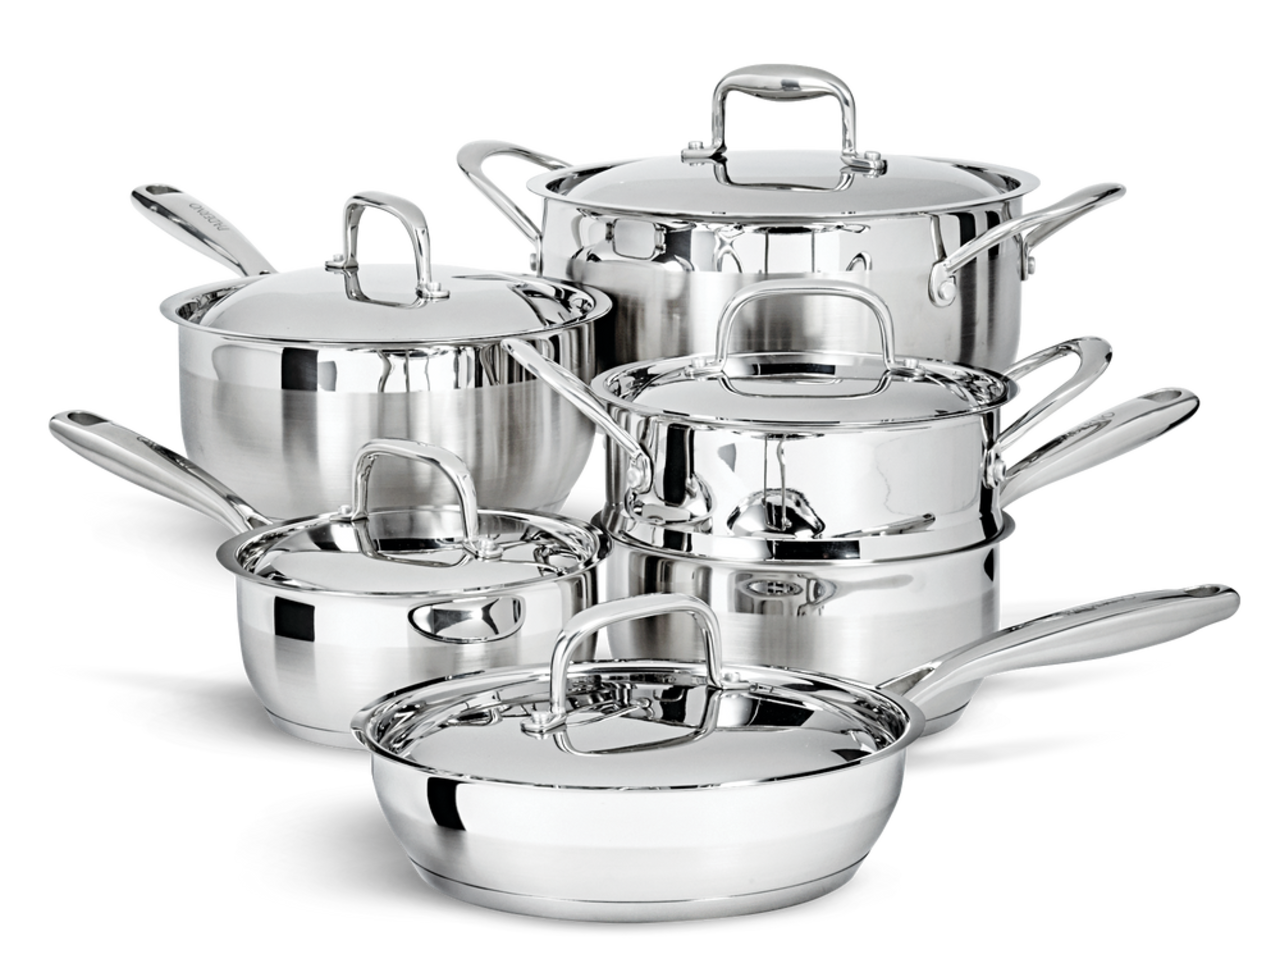  A.B Crew 2.5 Quart Saucepan with Steamer Basket and Oil Drain  Rack Nonstick 18/10 Stainless Steel Pot with Glass Lid 2.5 Qt Sauce Pan  Small Cooking Pot Frying Pan for Kitchen